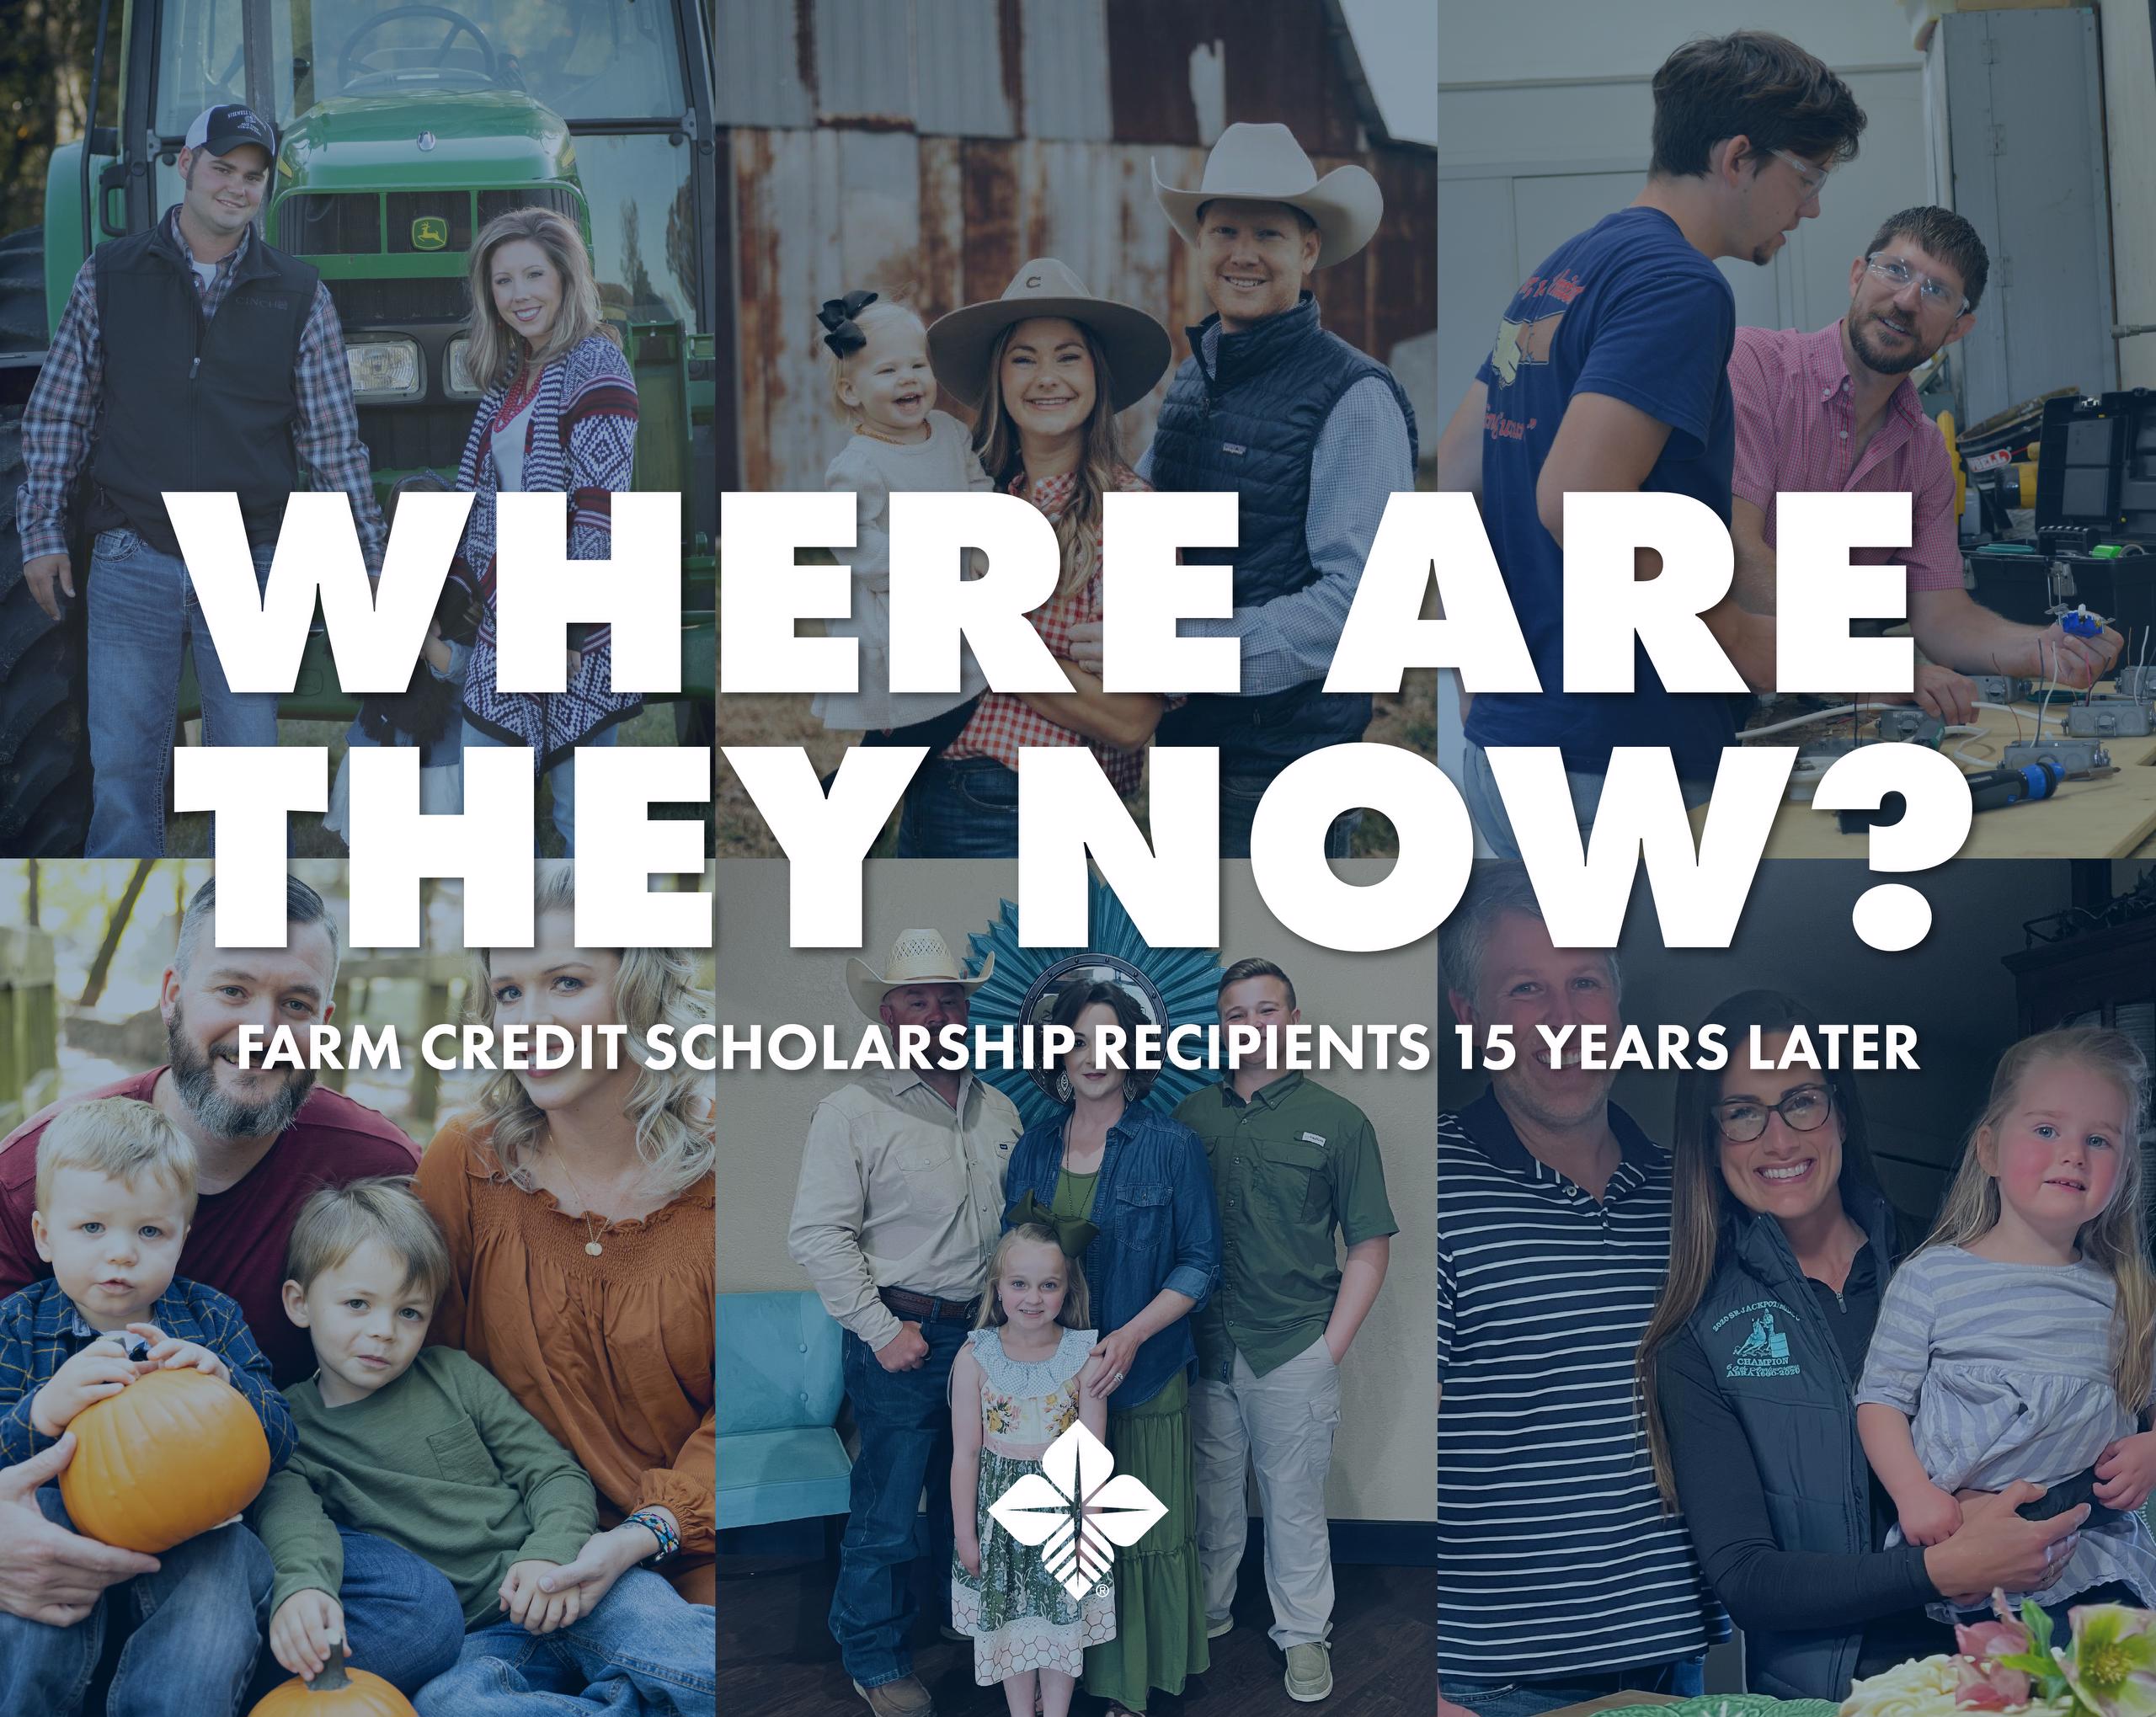 TEXT: Where are they now? Farm Credit Scholarship recipients 15 years later